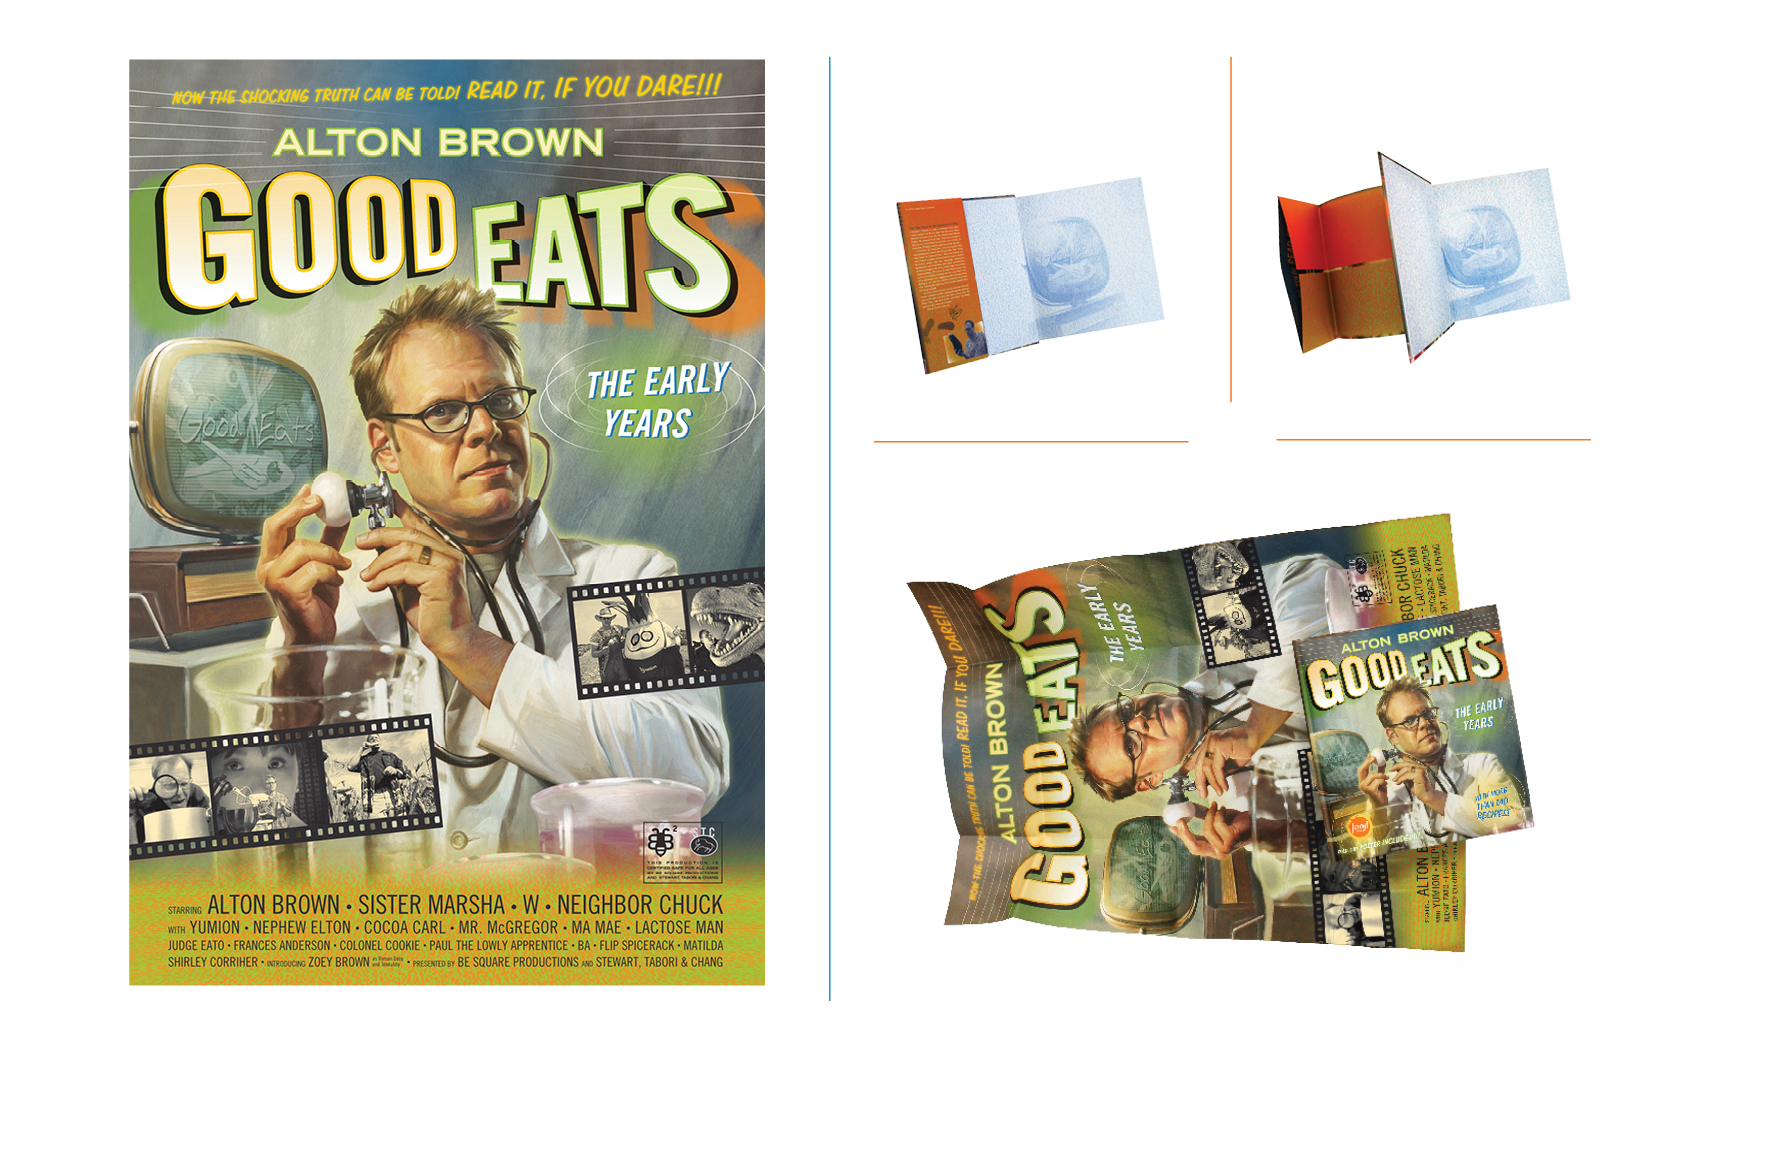   Good Eats poster jacket -  Each Good Eats book featured a themed give away, for this volume a fold-out book jacket/poster   